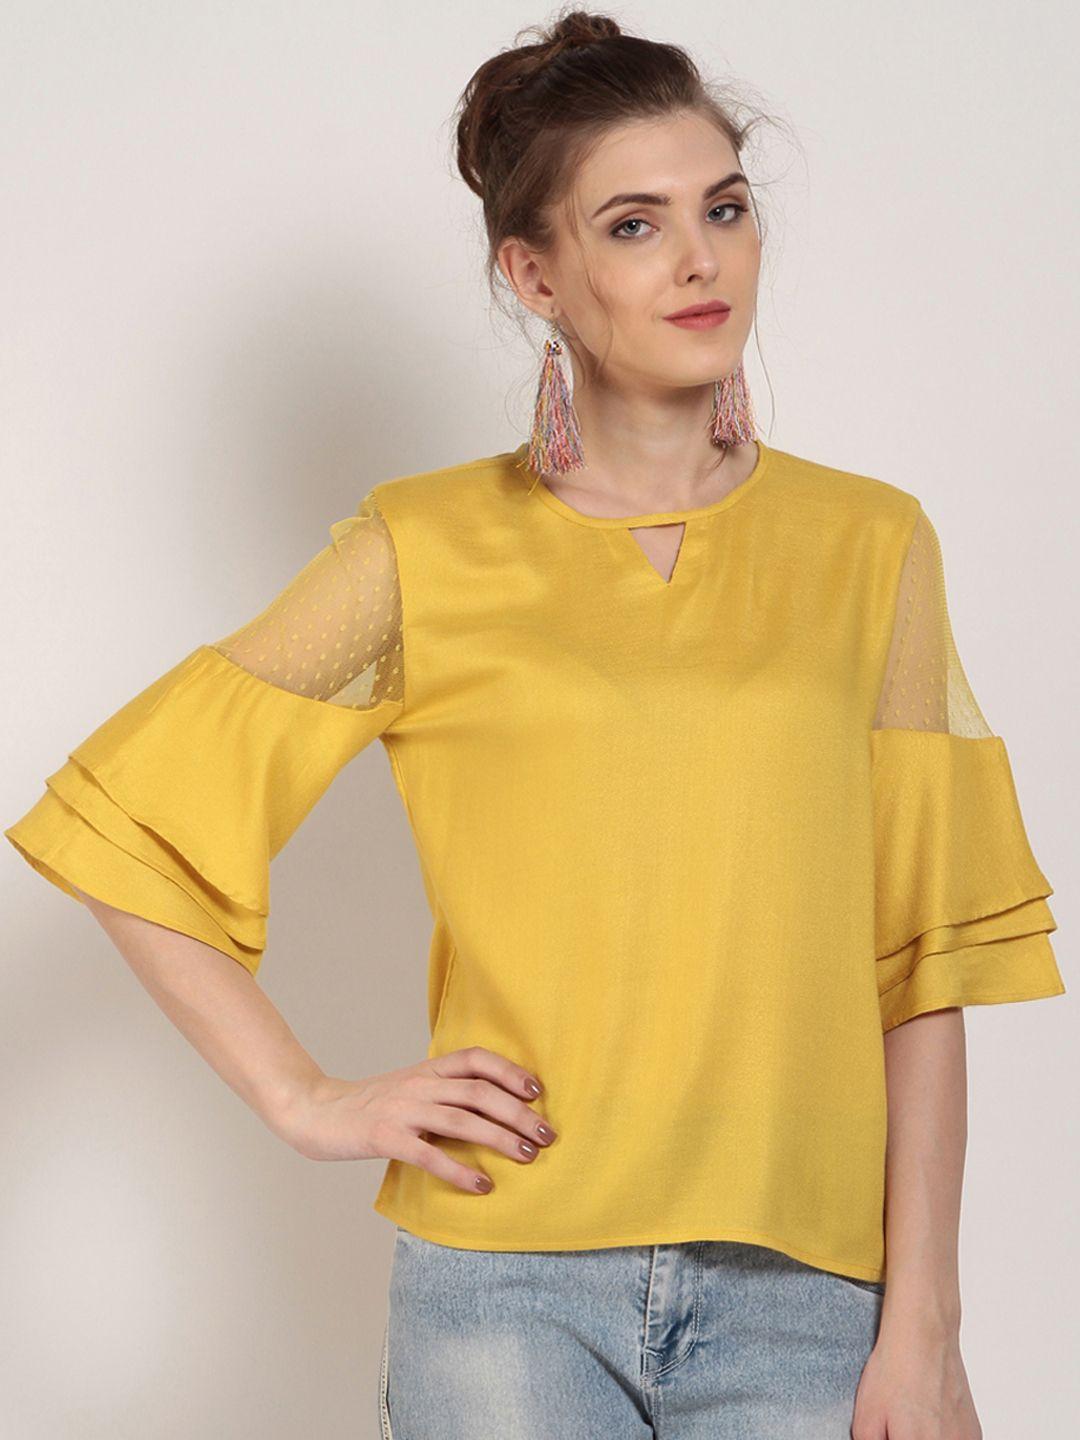 marie-claire-women-mustard-solid-top